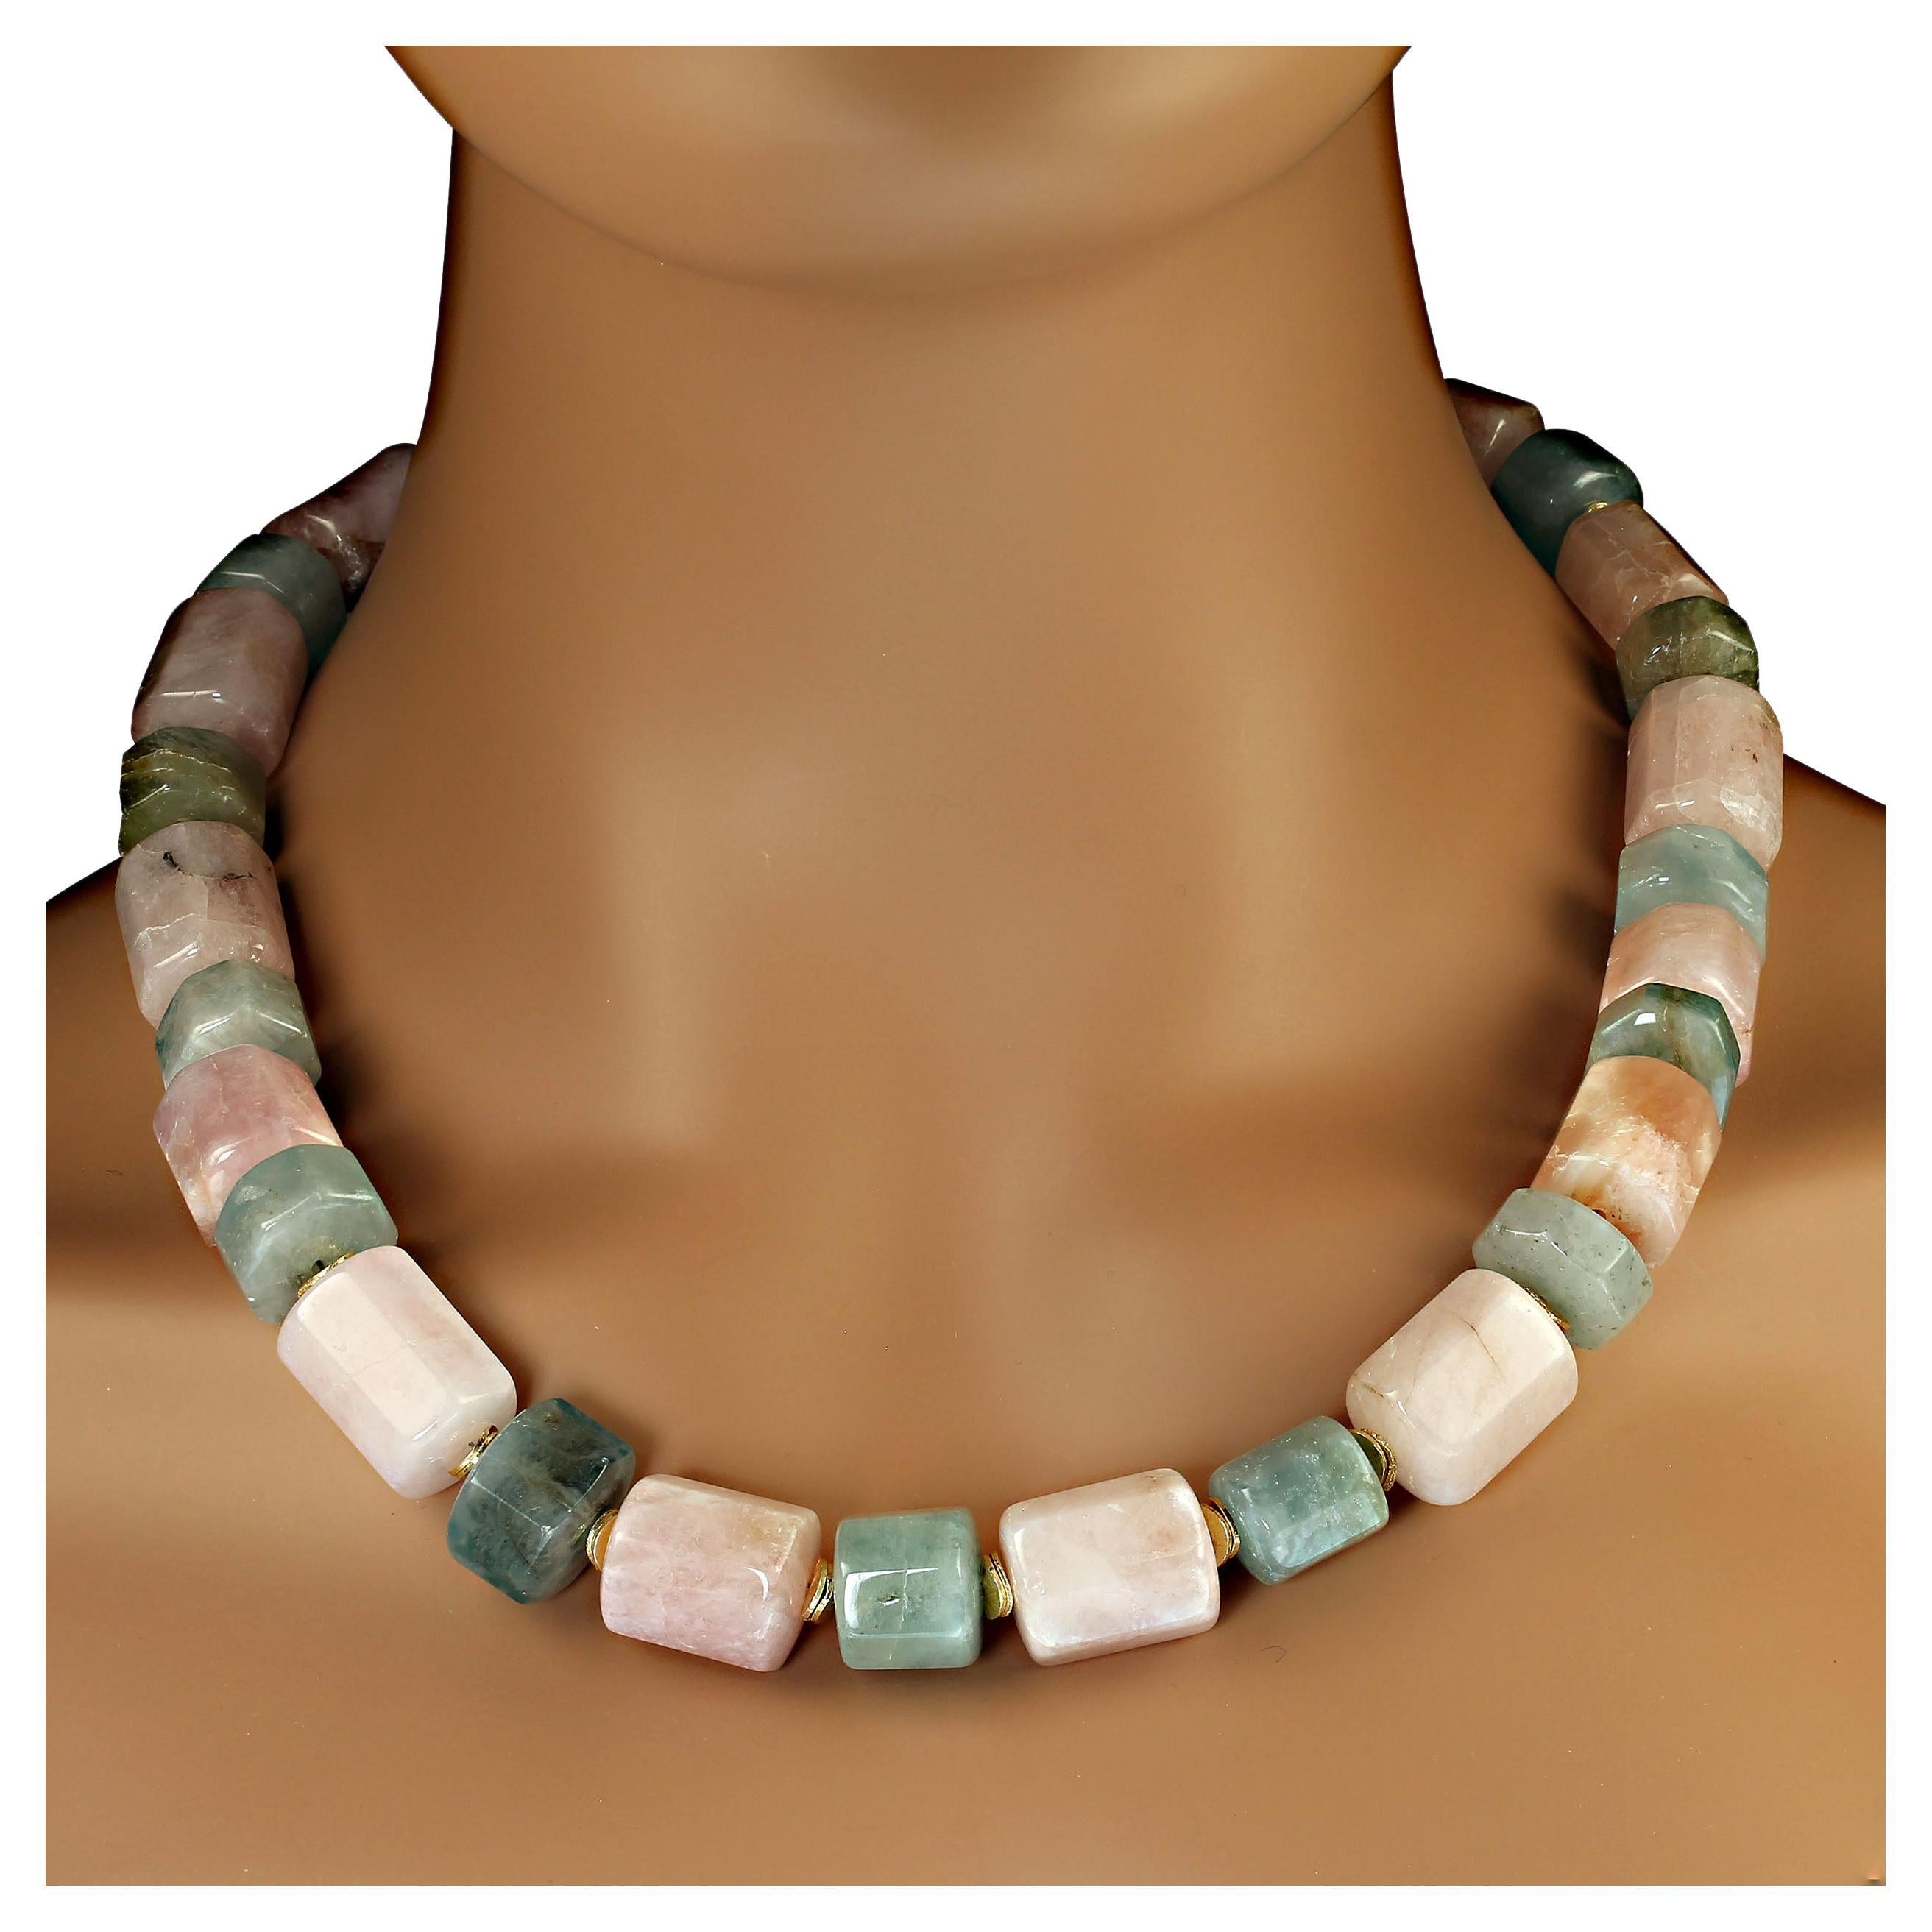 Unique 21 inch multi color beryl necklace.  This gorgeous beryl is barrel shaped in various lengths and colors, pink, green, and blue. Goldy flutters accent the lovely beryl colors.  This one-of-a-kind necklace is finished with a 14K yellow gold